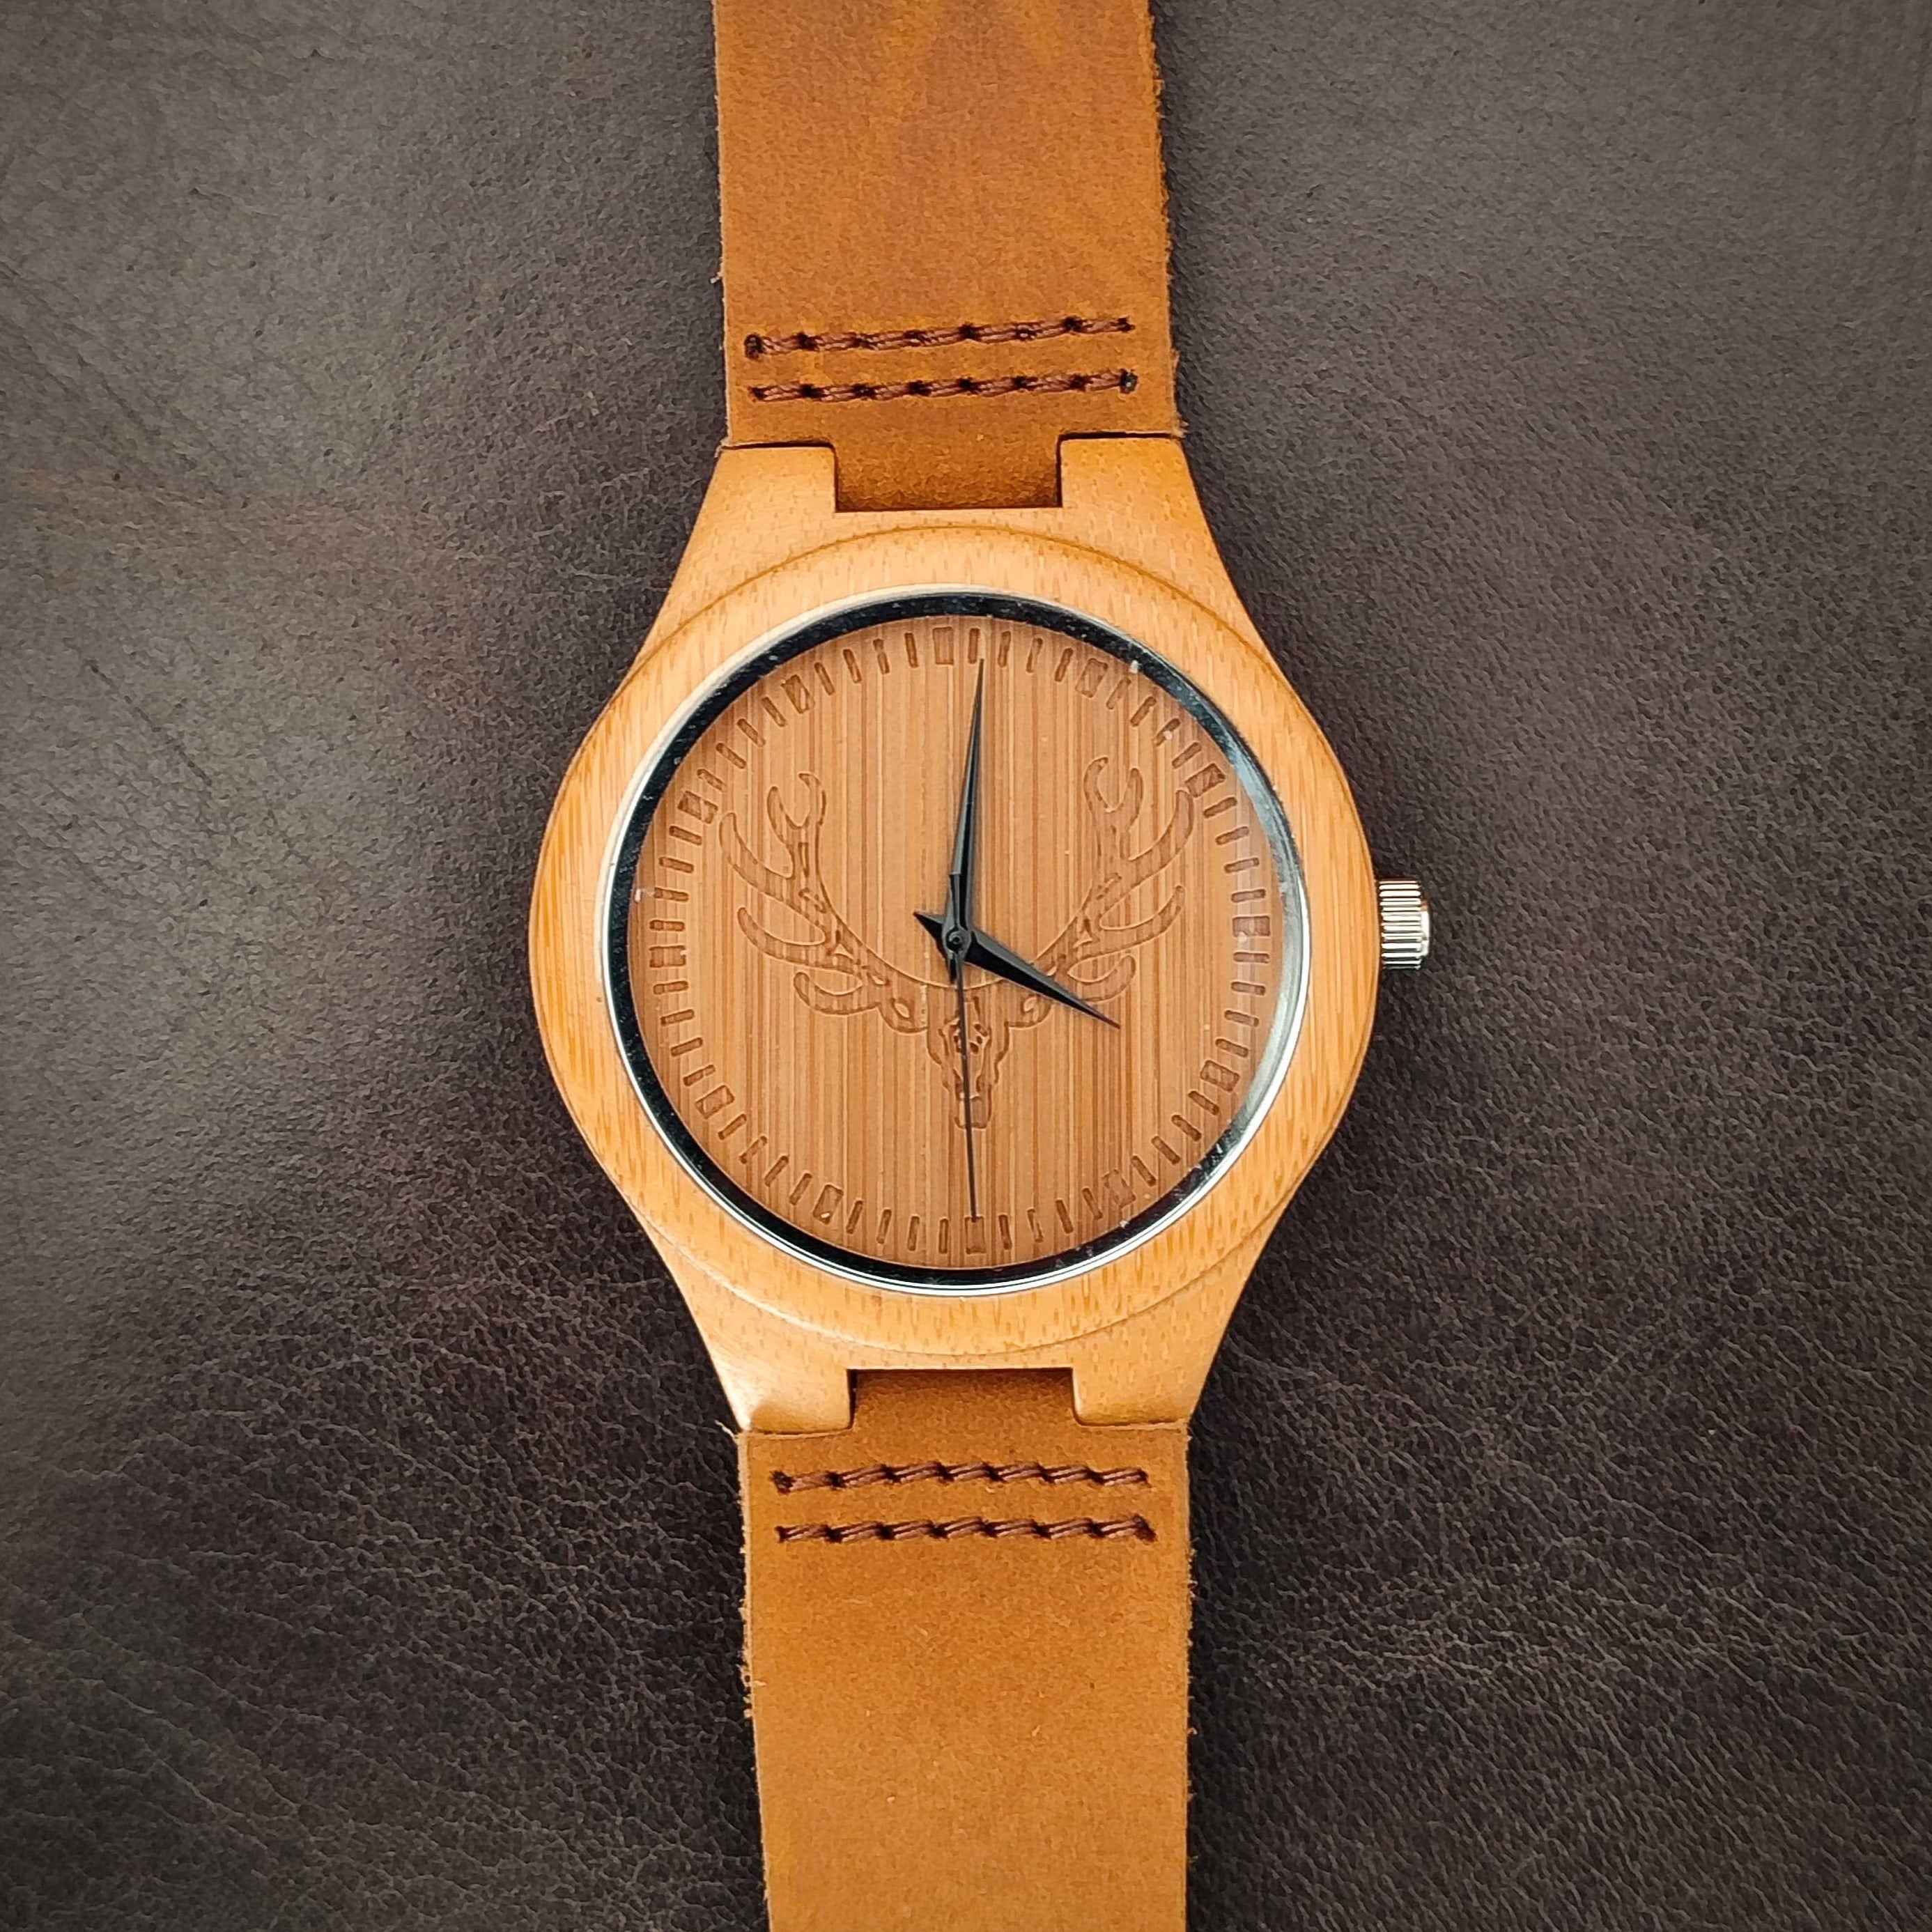 The Antler Bamboo Wooden Watch With Leather Strap - Unisex